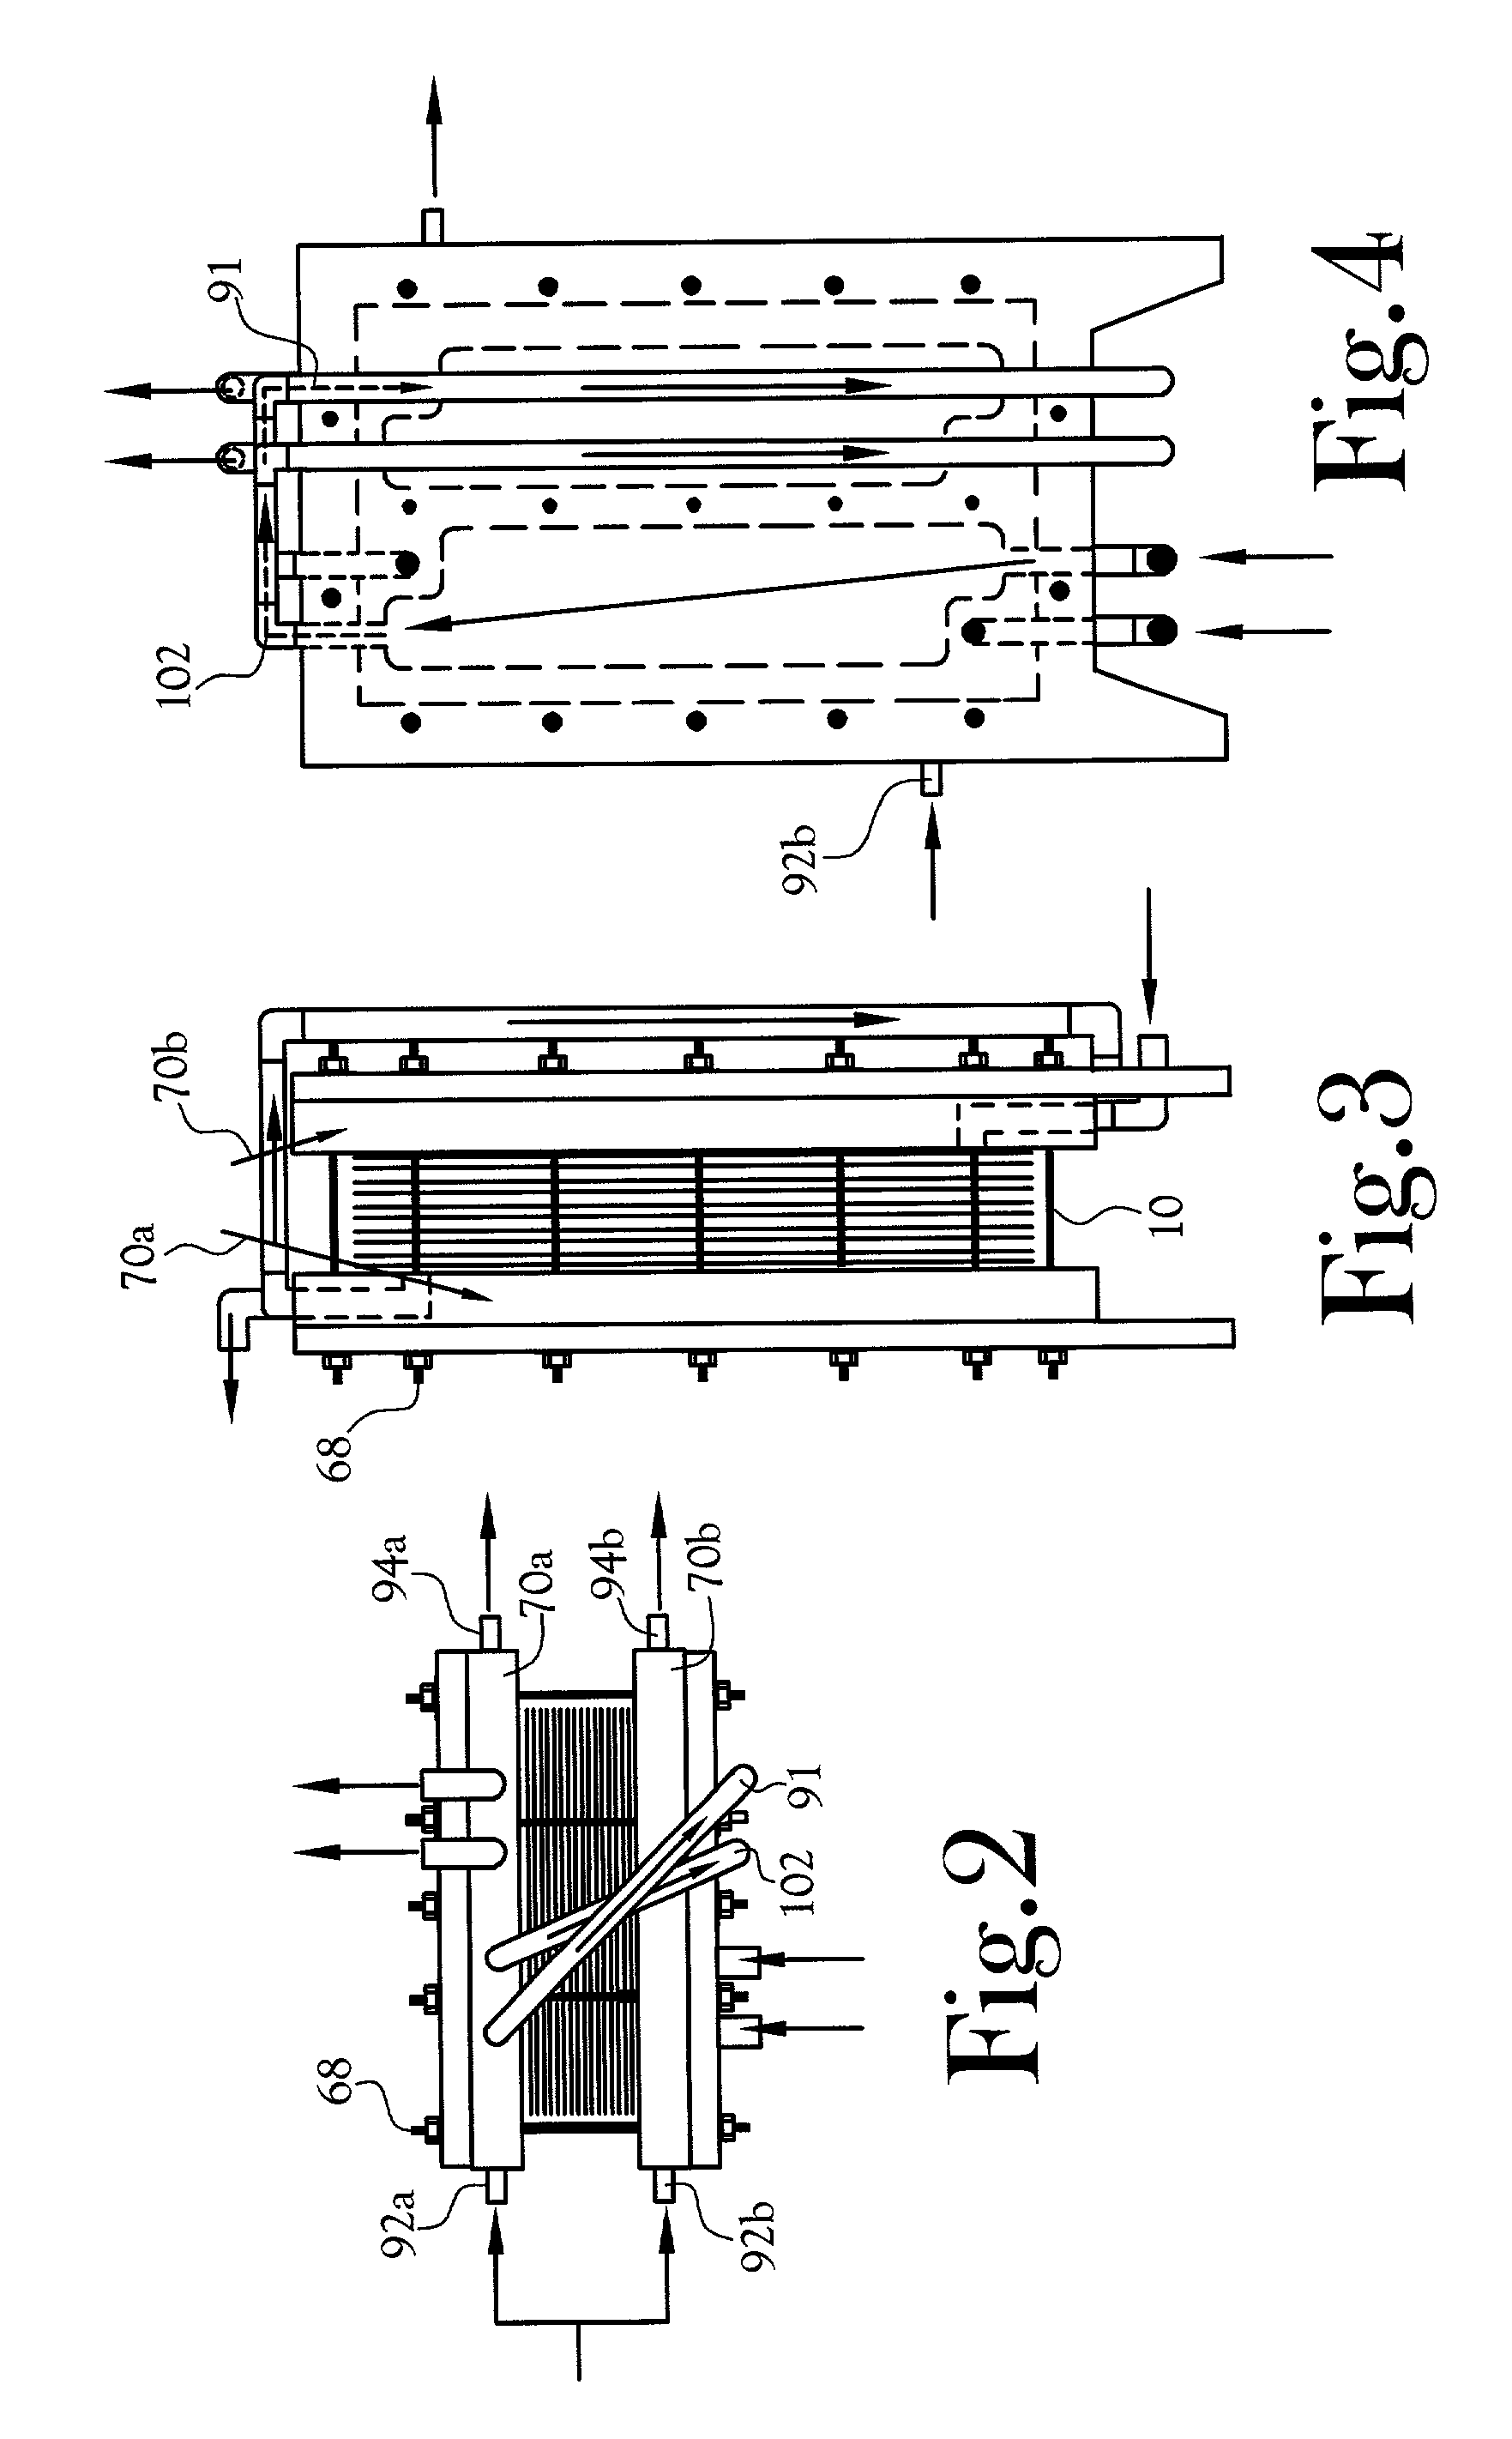 Multi-path split cell spacer and electrodialysis stack design